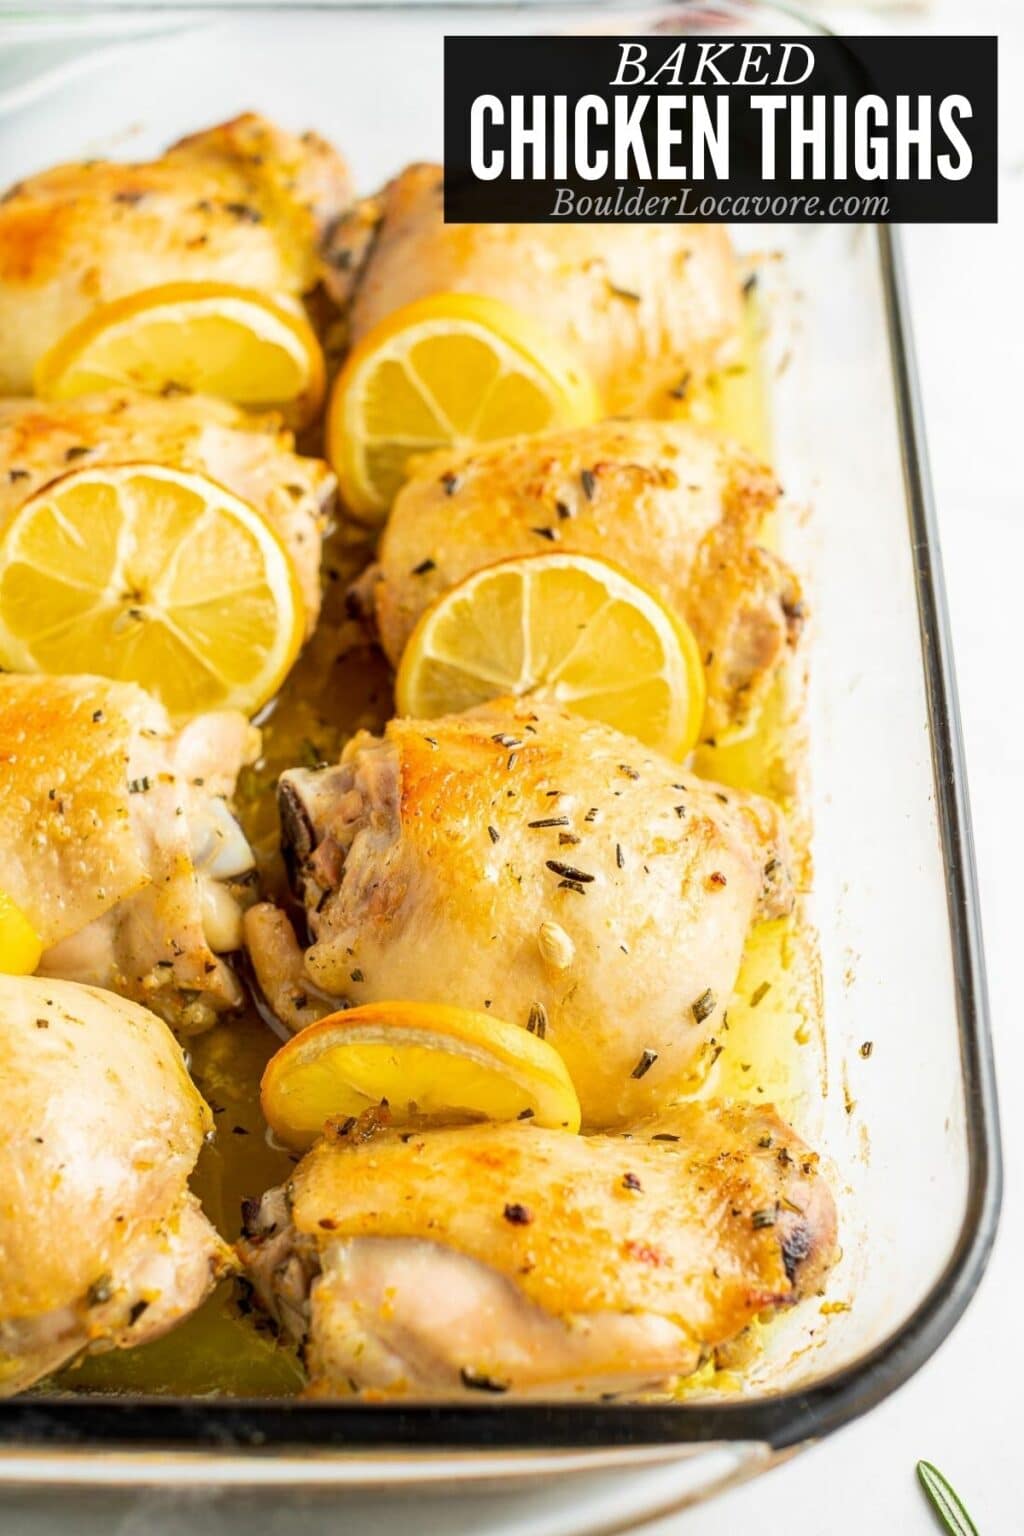 Baked Chicken Thighs recipe with Citrus flavors - Boulder Locavore